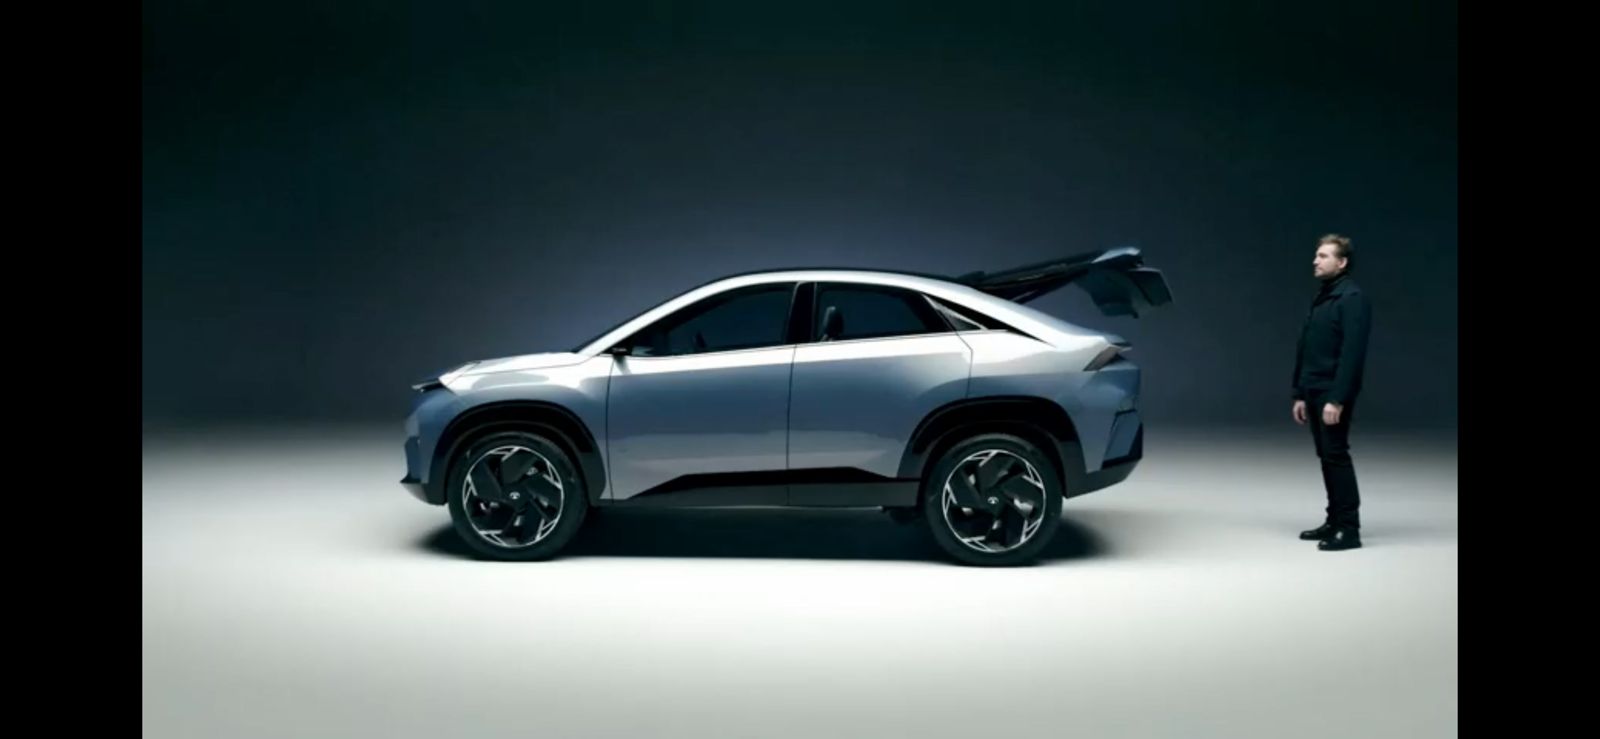 <p>From the looks of the design, the new SUV will participate in the mid-size category of SUVs</p>